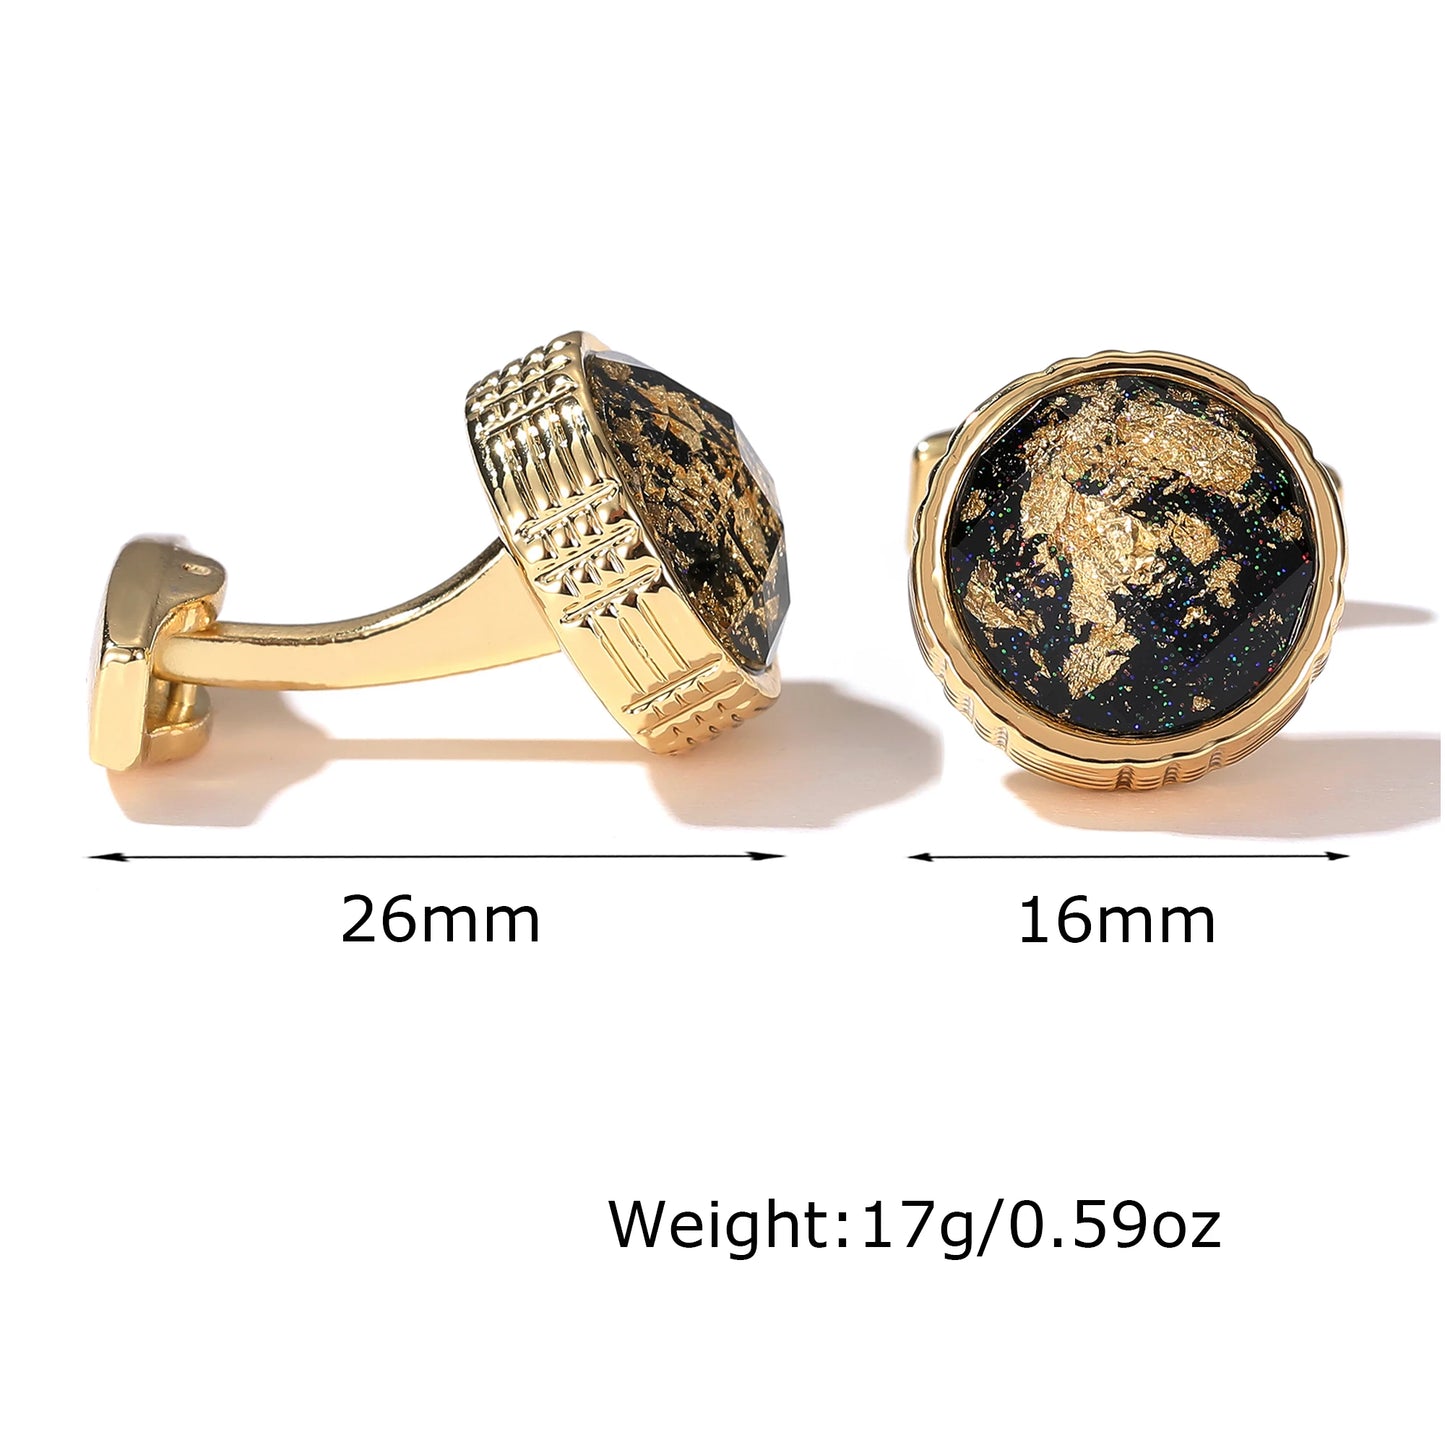 Cufflinks Gold Color TOMYE XK22S014 Personalized Round Tuxedo Formal Shirt Cuff Links Button for Men Wedding Gifts Jewelry